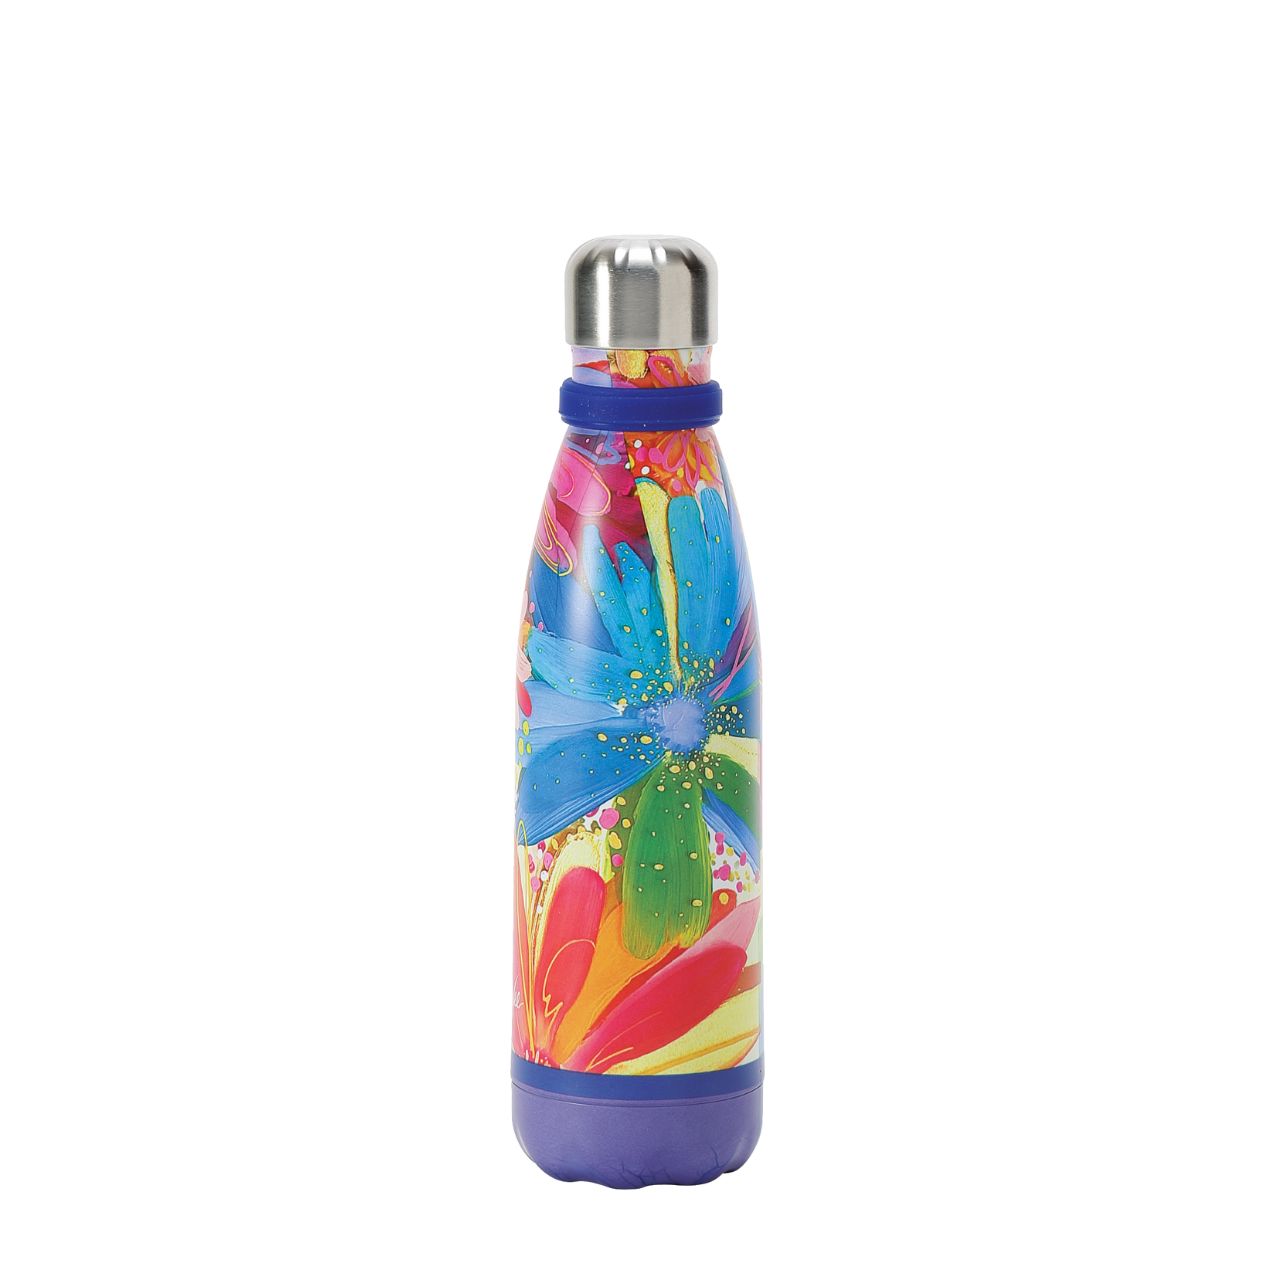 Etta Vee Jessi's Garden Water Bottle  Artist, designer and art influencer, Jessi Raulet, is known for her colourful and bold designs. This stainless steel water bottle features a wrap around design with colour blocked accents. The suede tassel is removeable for cleaning and this also comes in a gift box.